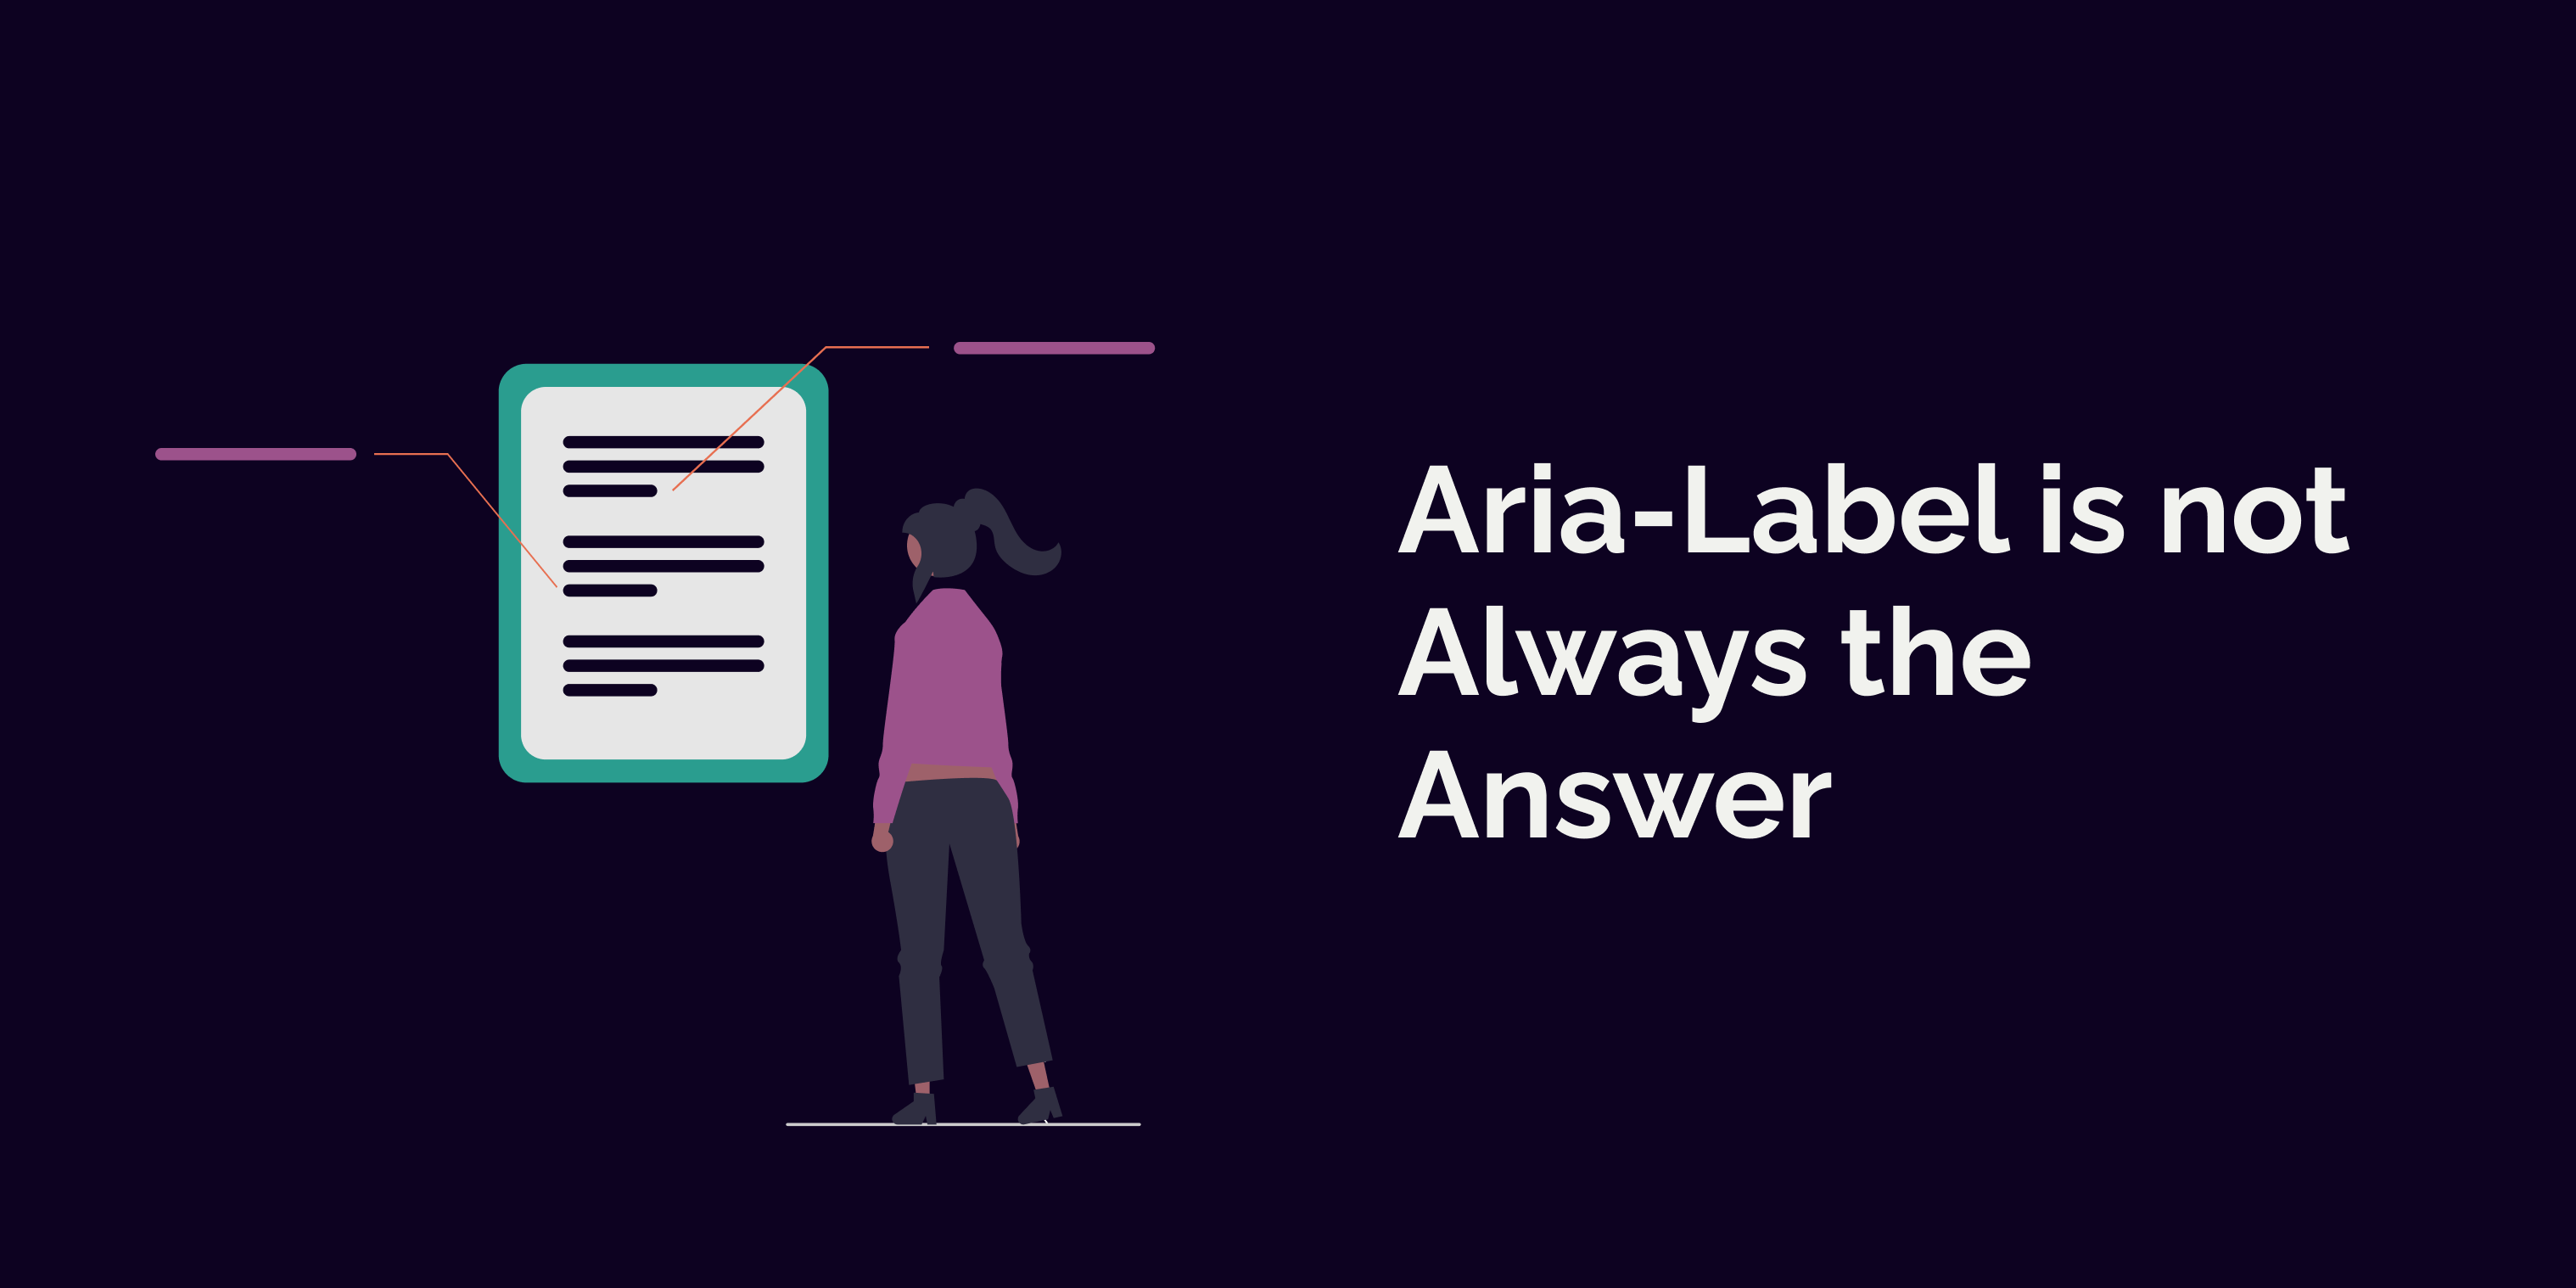 Aria-Label is not Always the Answer with an illustration of woman standing and looking at a screen with rectangles representing text, and lines going from the texts to outside the screen to another lines annotating aria-labels.